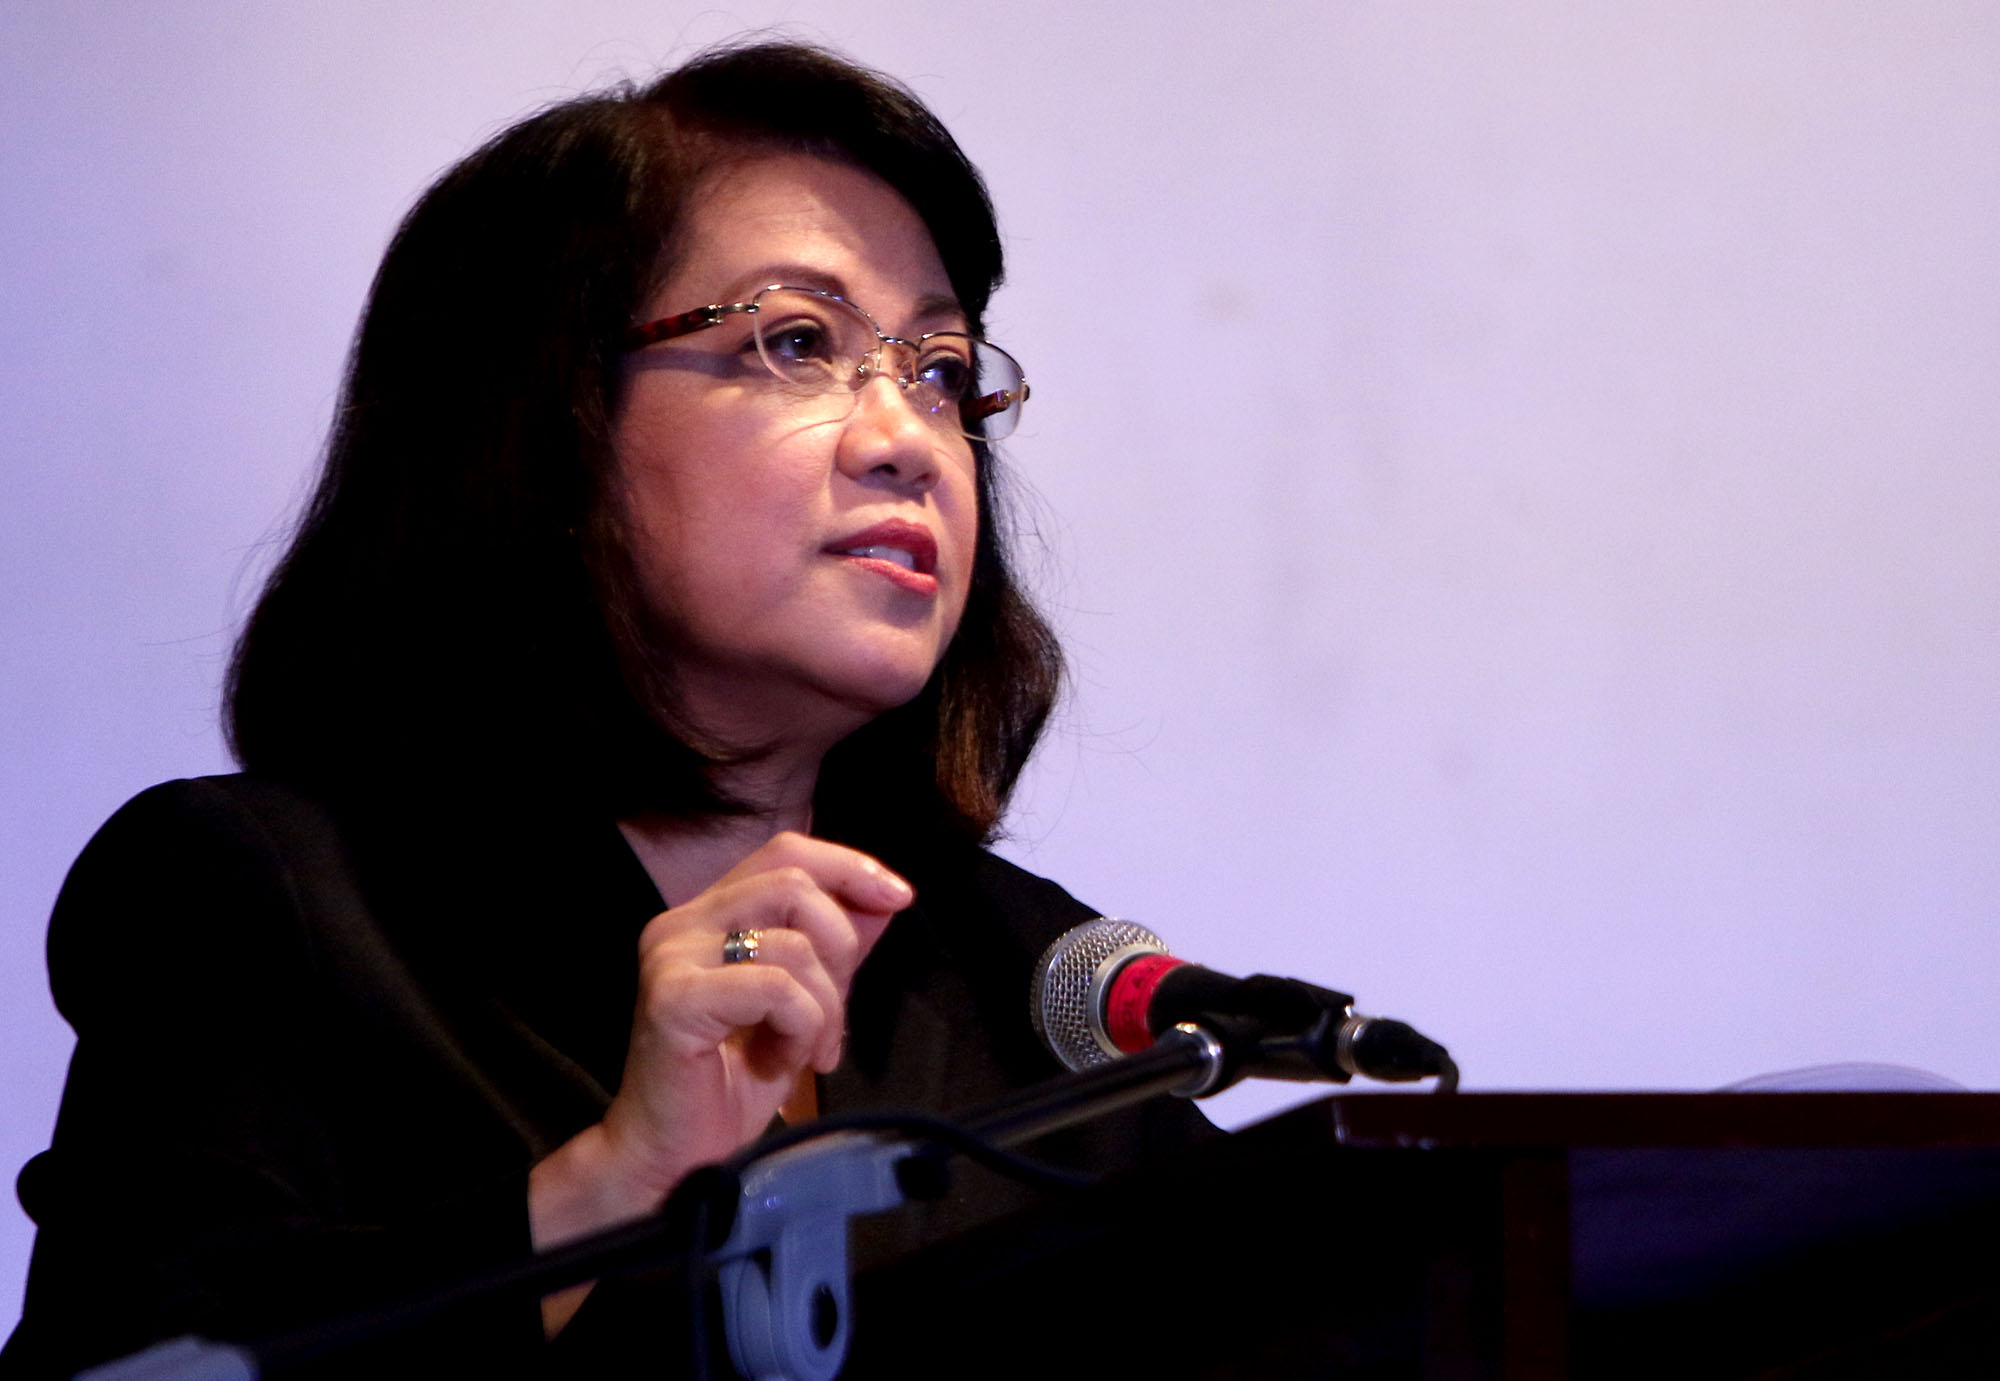 CHIEF JUSTICE SERENO IN ST. SCHOLASTICA FORUM / MARCH 07, 2018 Chief Justice Maria Lourdes Sereno speaks during 'Laban ng Kababaihan, Laban ng Bayan', a fourm in defense of women, ethical governance and sovereignty at St. Scholastica College in Manila in celebration of International Women's day. INQUIRER PHOTO / RICHARD A. REYES